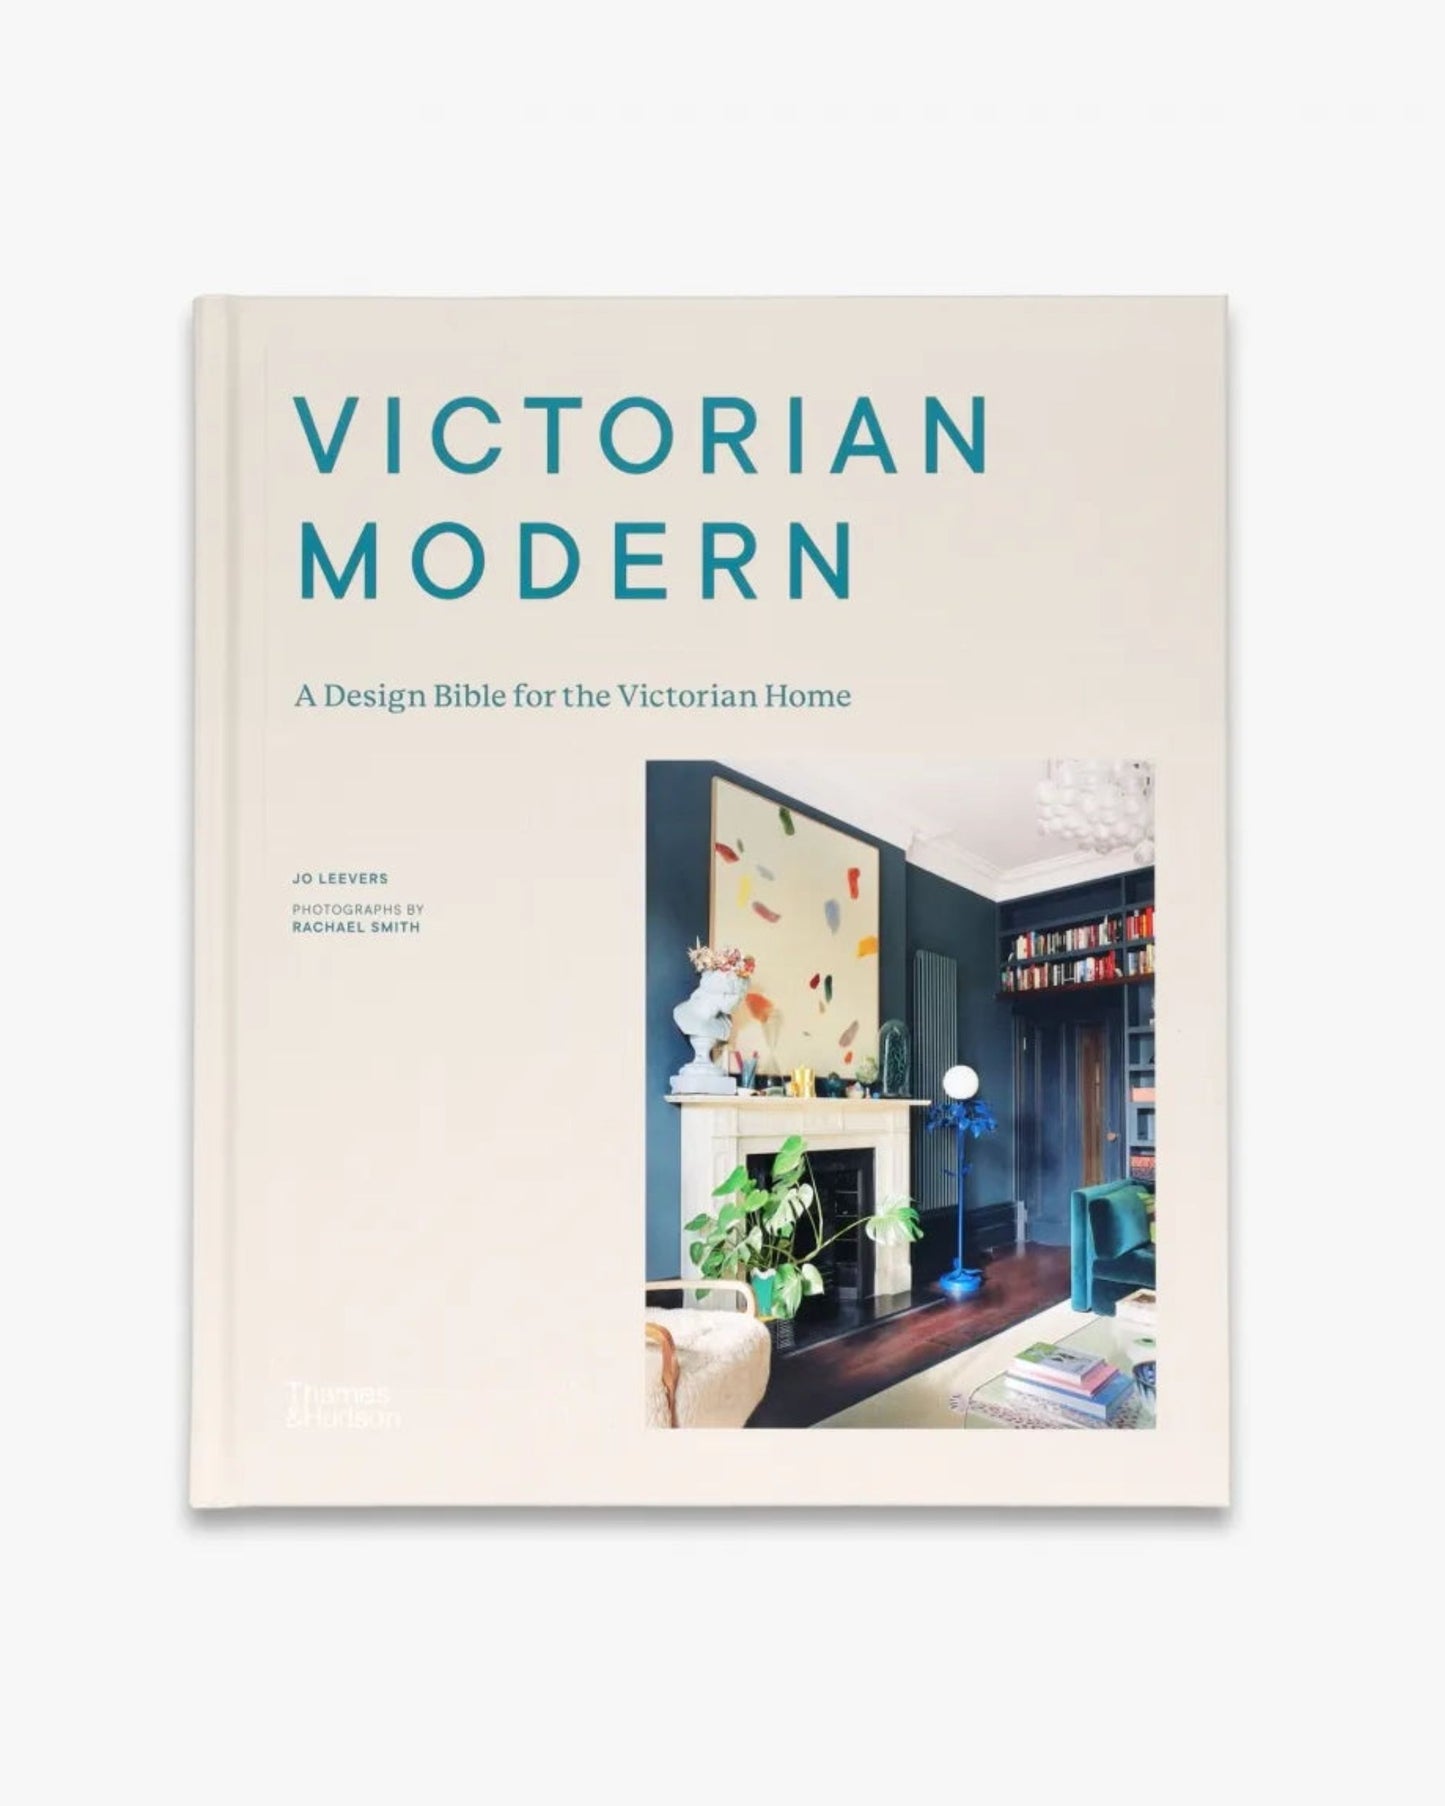 Design bible for the Victorian home. Hardback book exploring how today’s designers are adapting these houses in innovative ways for contemporary lifestyles